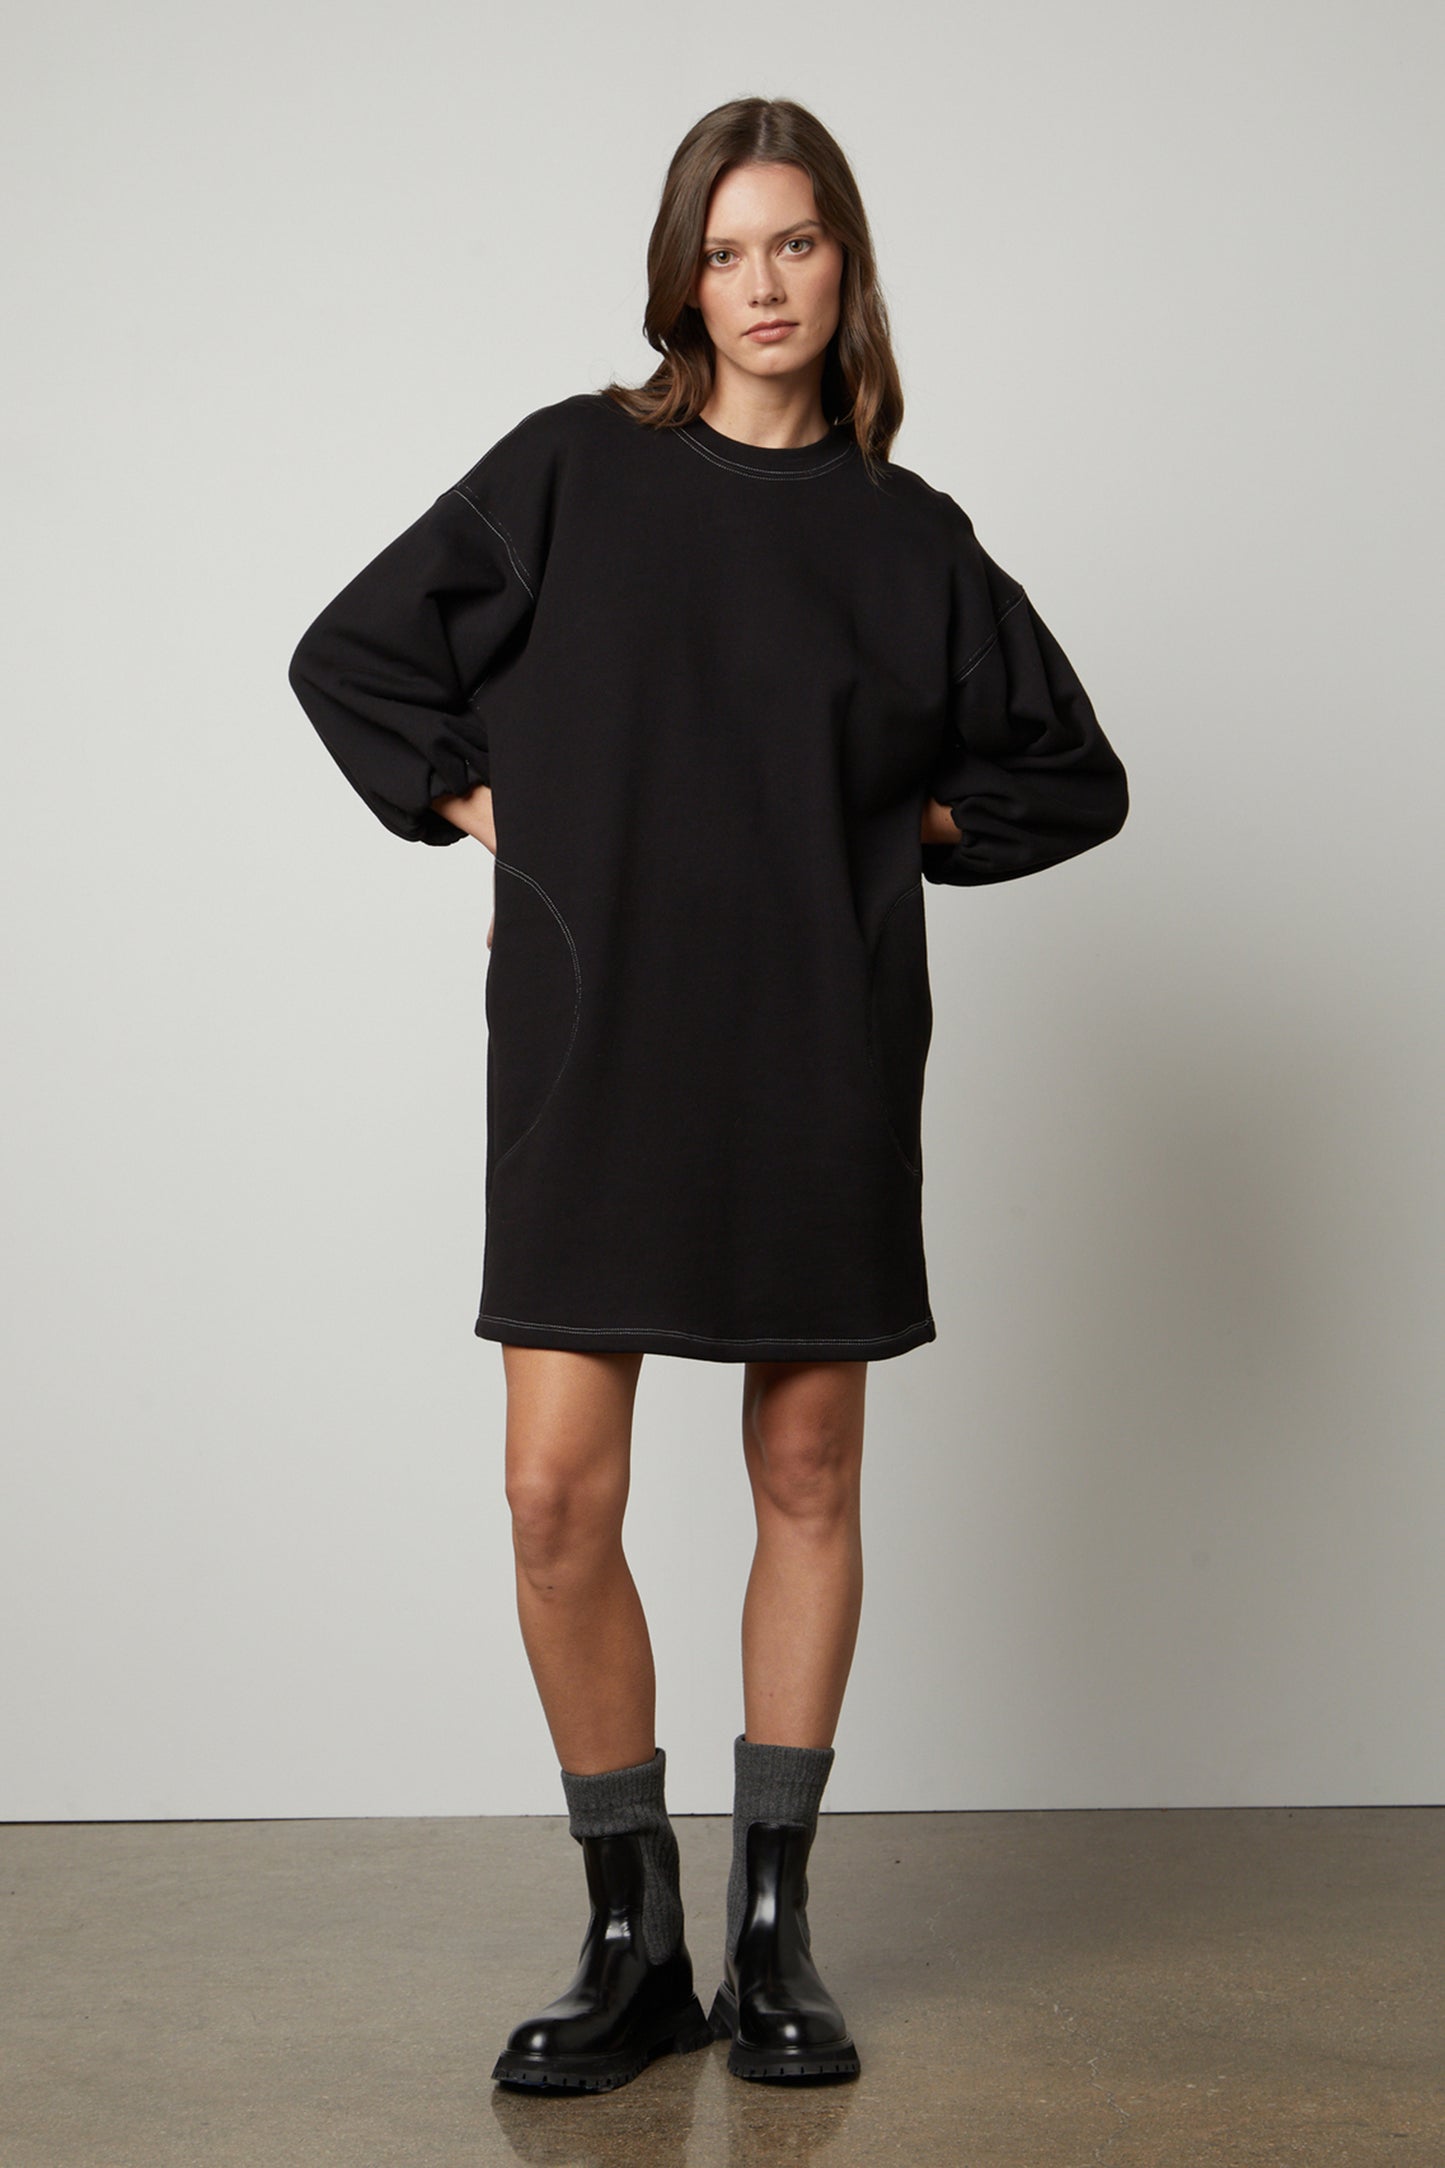 A model wearing a Velvet by Graham & Spencer JENSEN PUFF SLEEVE DRESS and black boots.-26883616833729